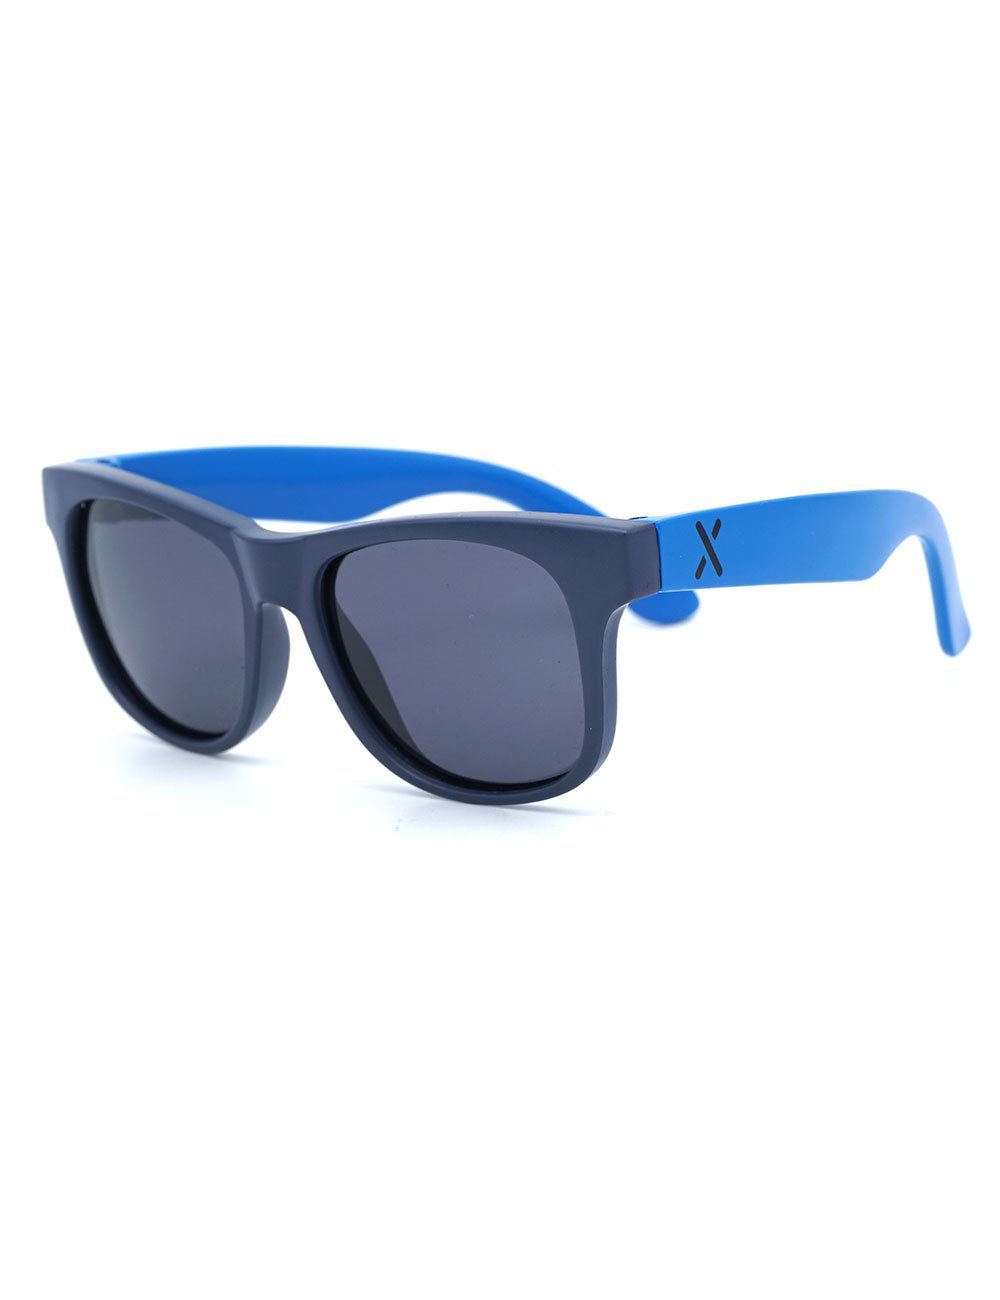 MAXIMO 'classic', inkl.Box,Microfaserb blue KIDS-Sonnenbrille navy/royal Sonnenbrille